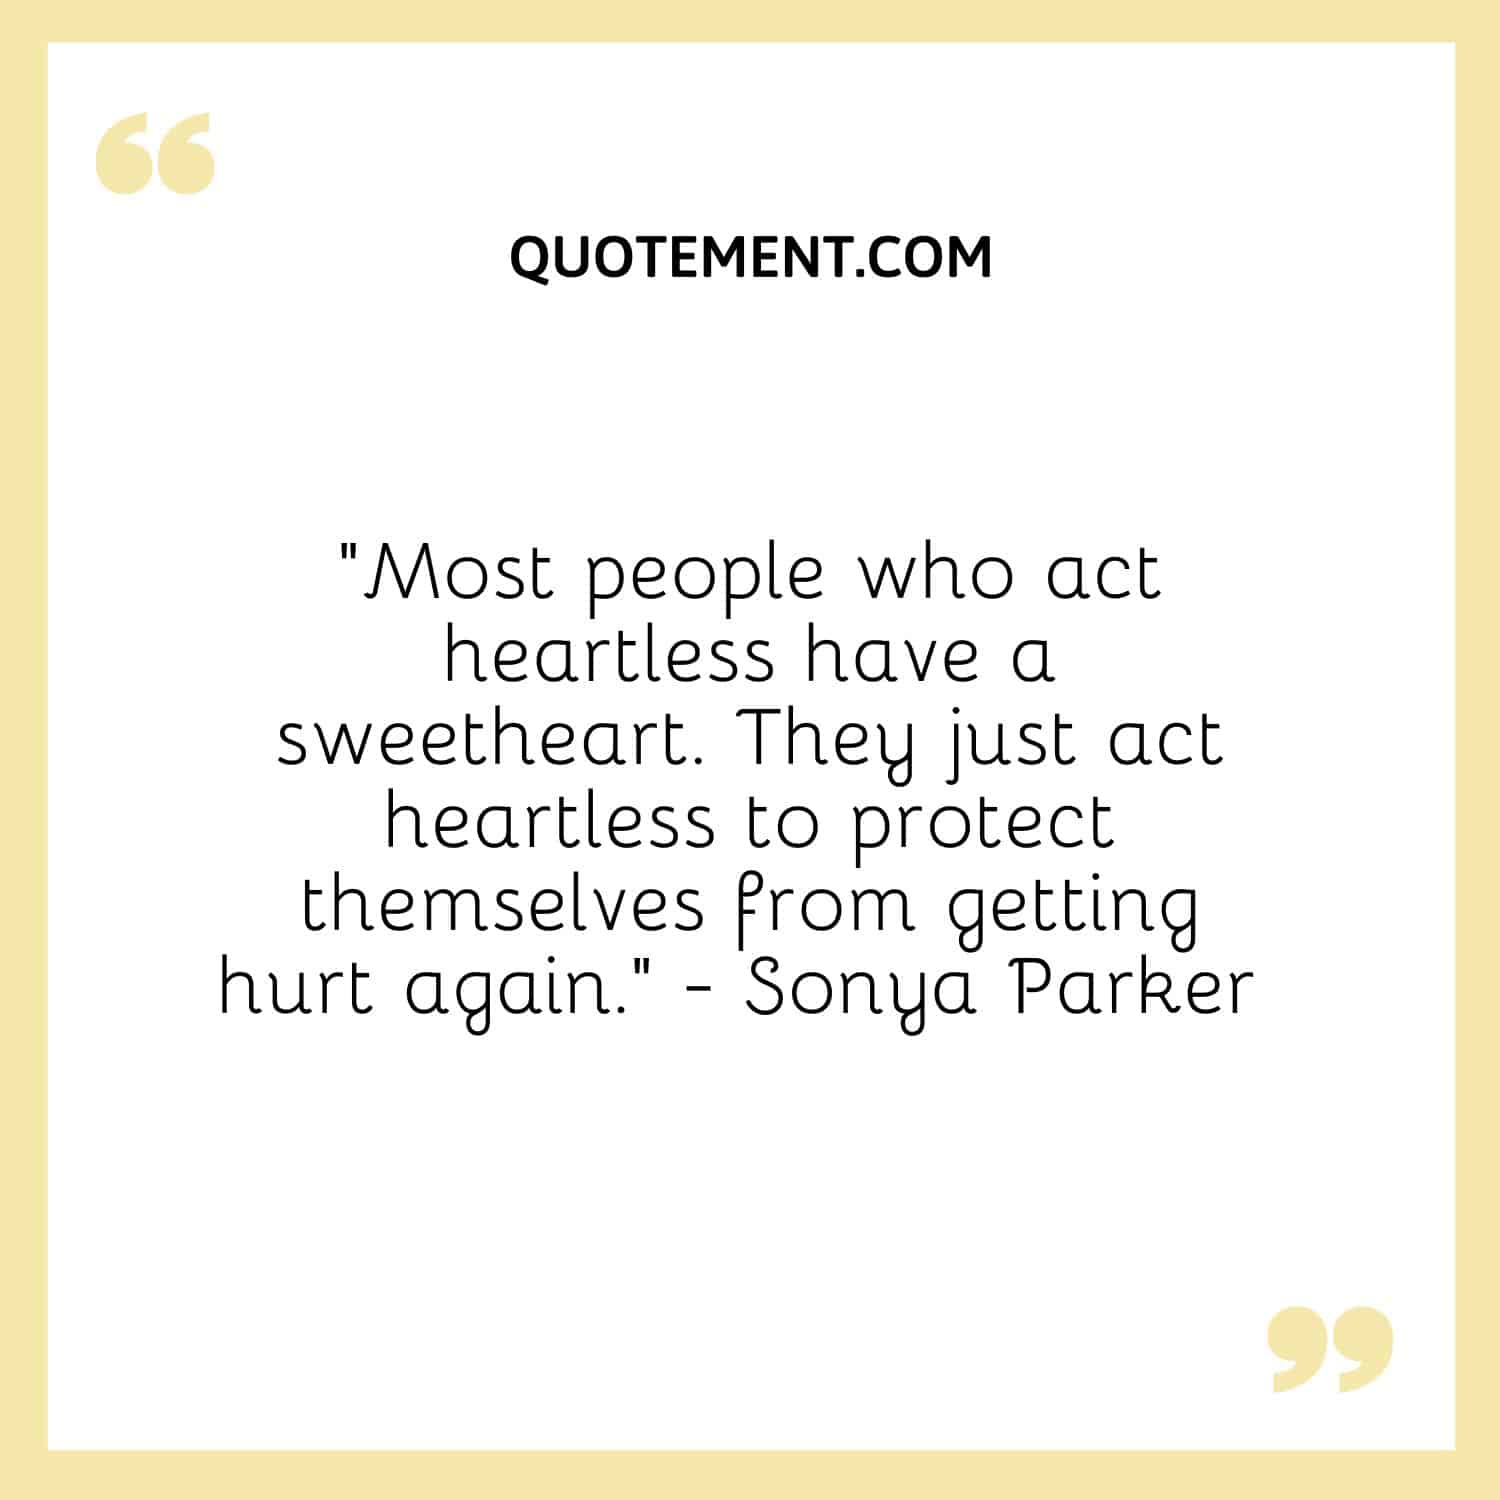 Most people who act heartless have a sweetheart